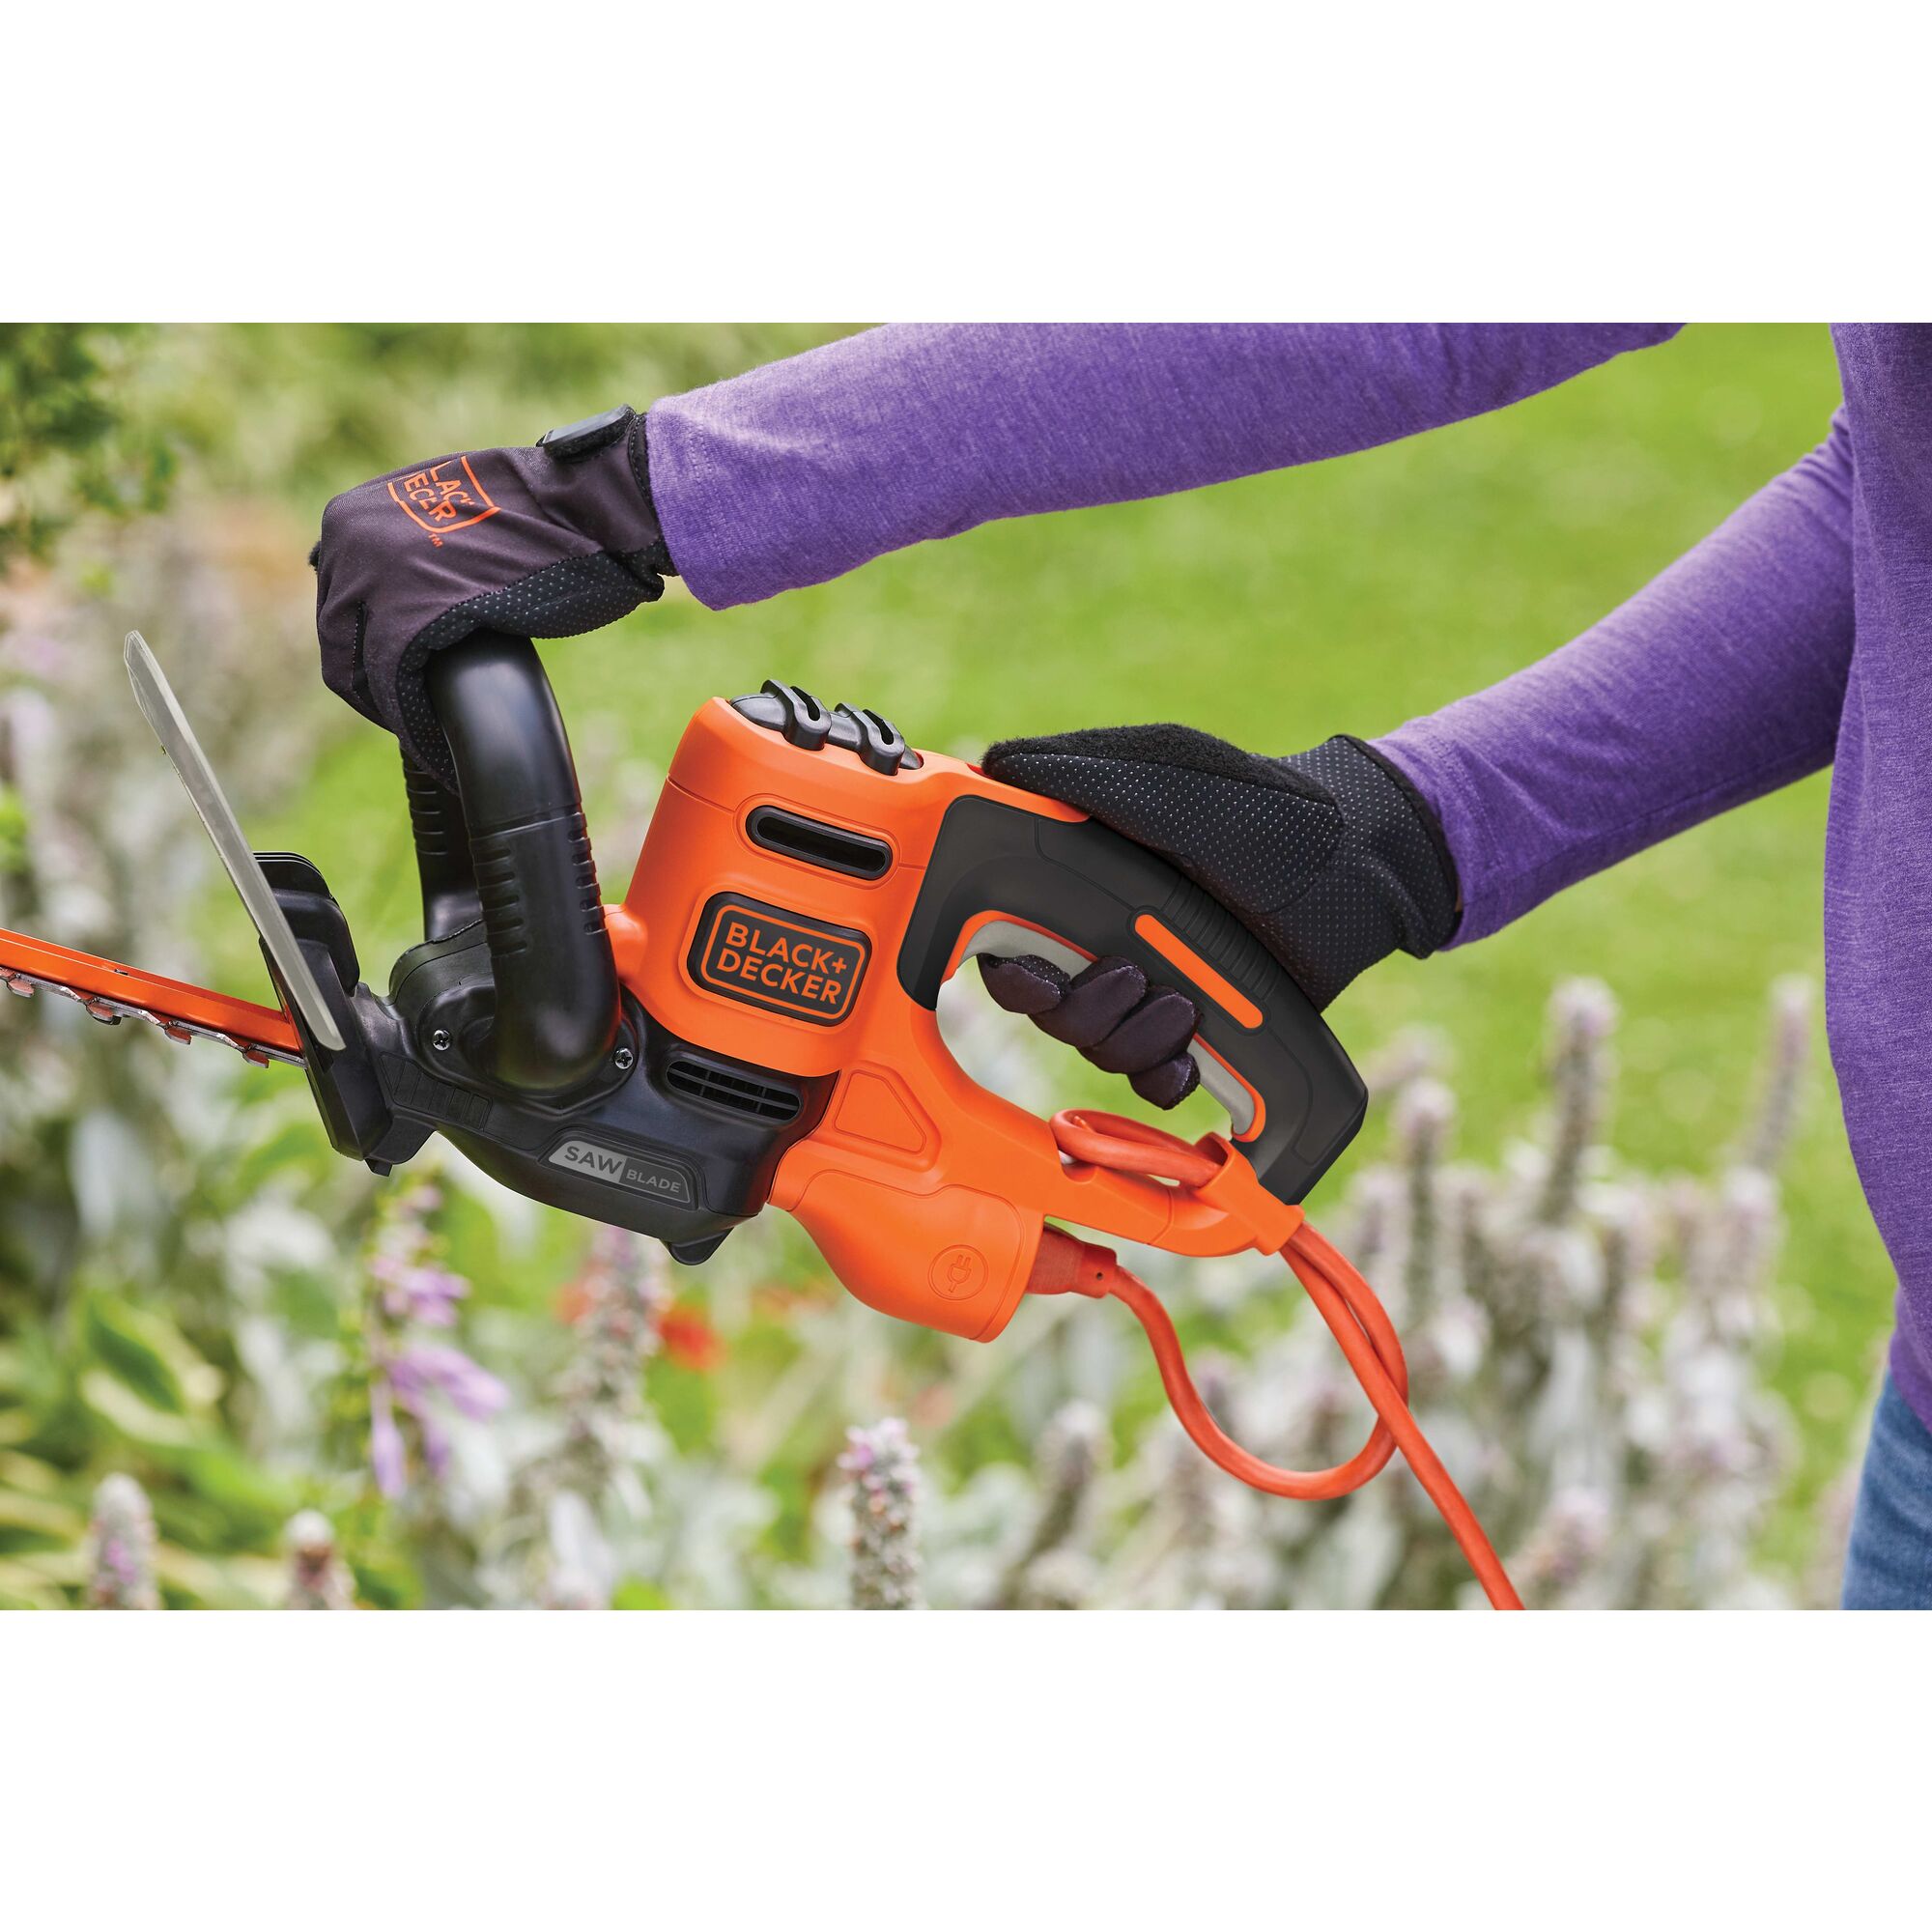 Full wrap around front handle feature of 22 inch SAW BLADE Electric Hedge Trimmer.